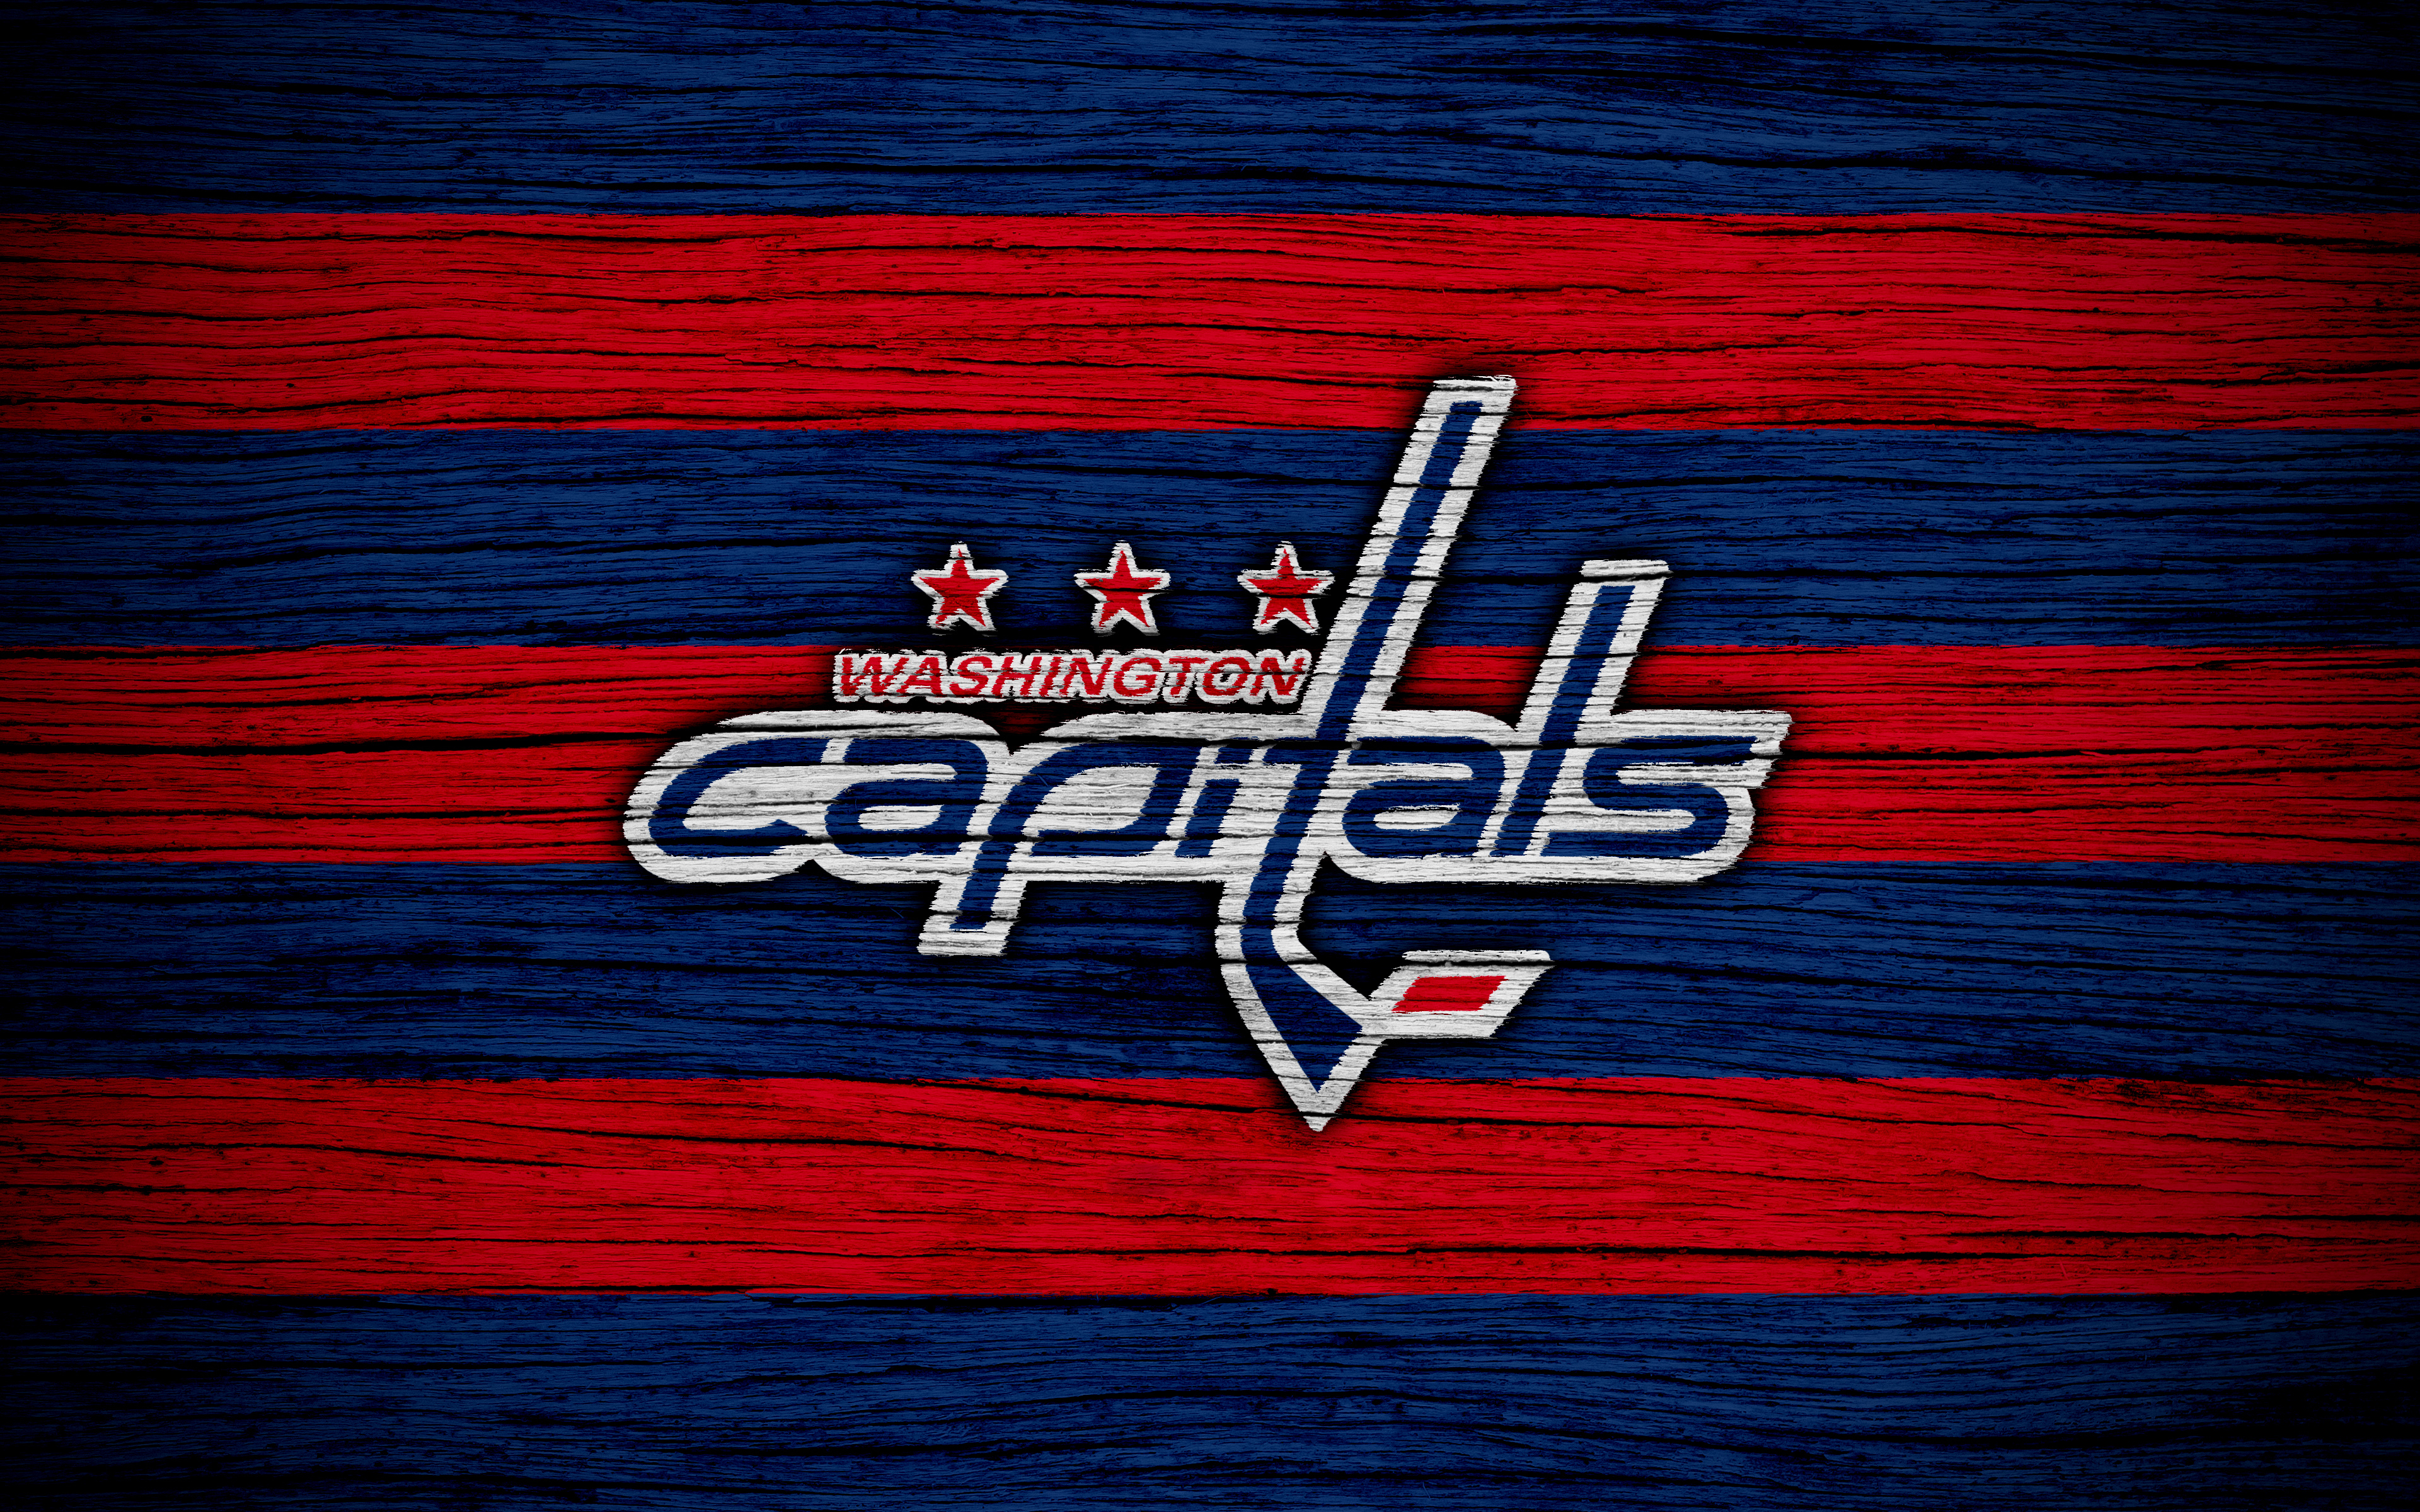 Download Washington Capitals wallpapers for mobile phone, free